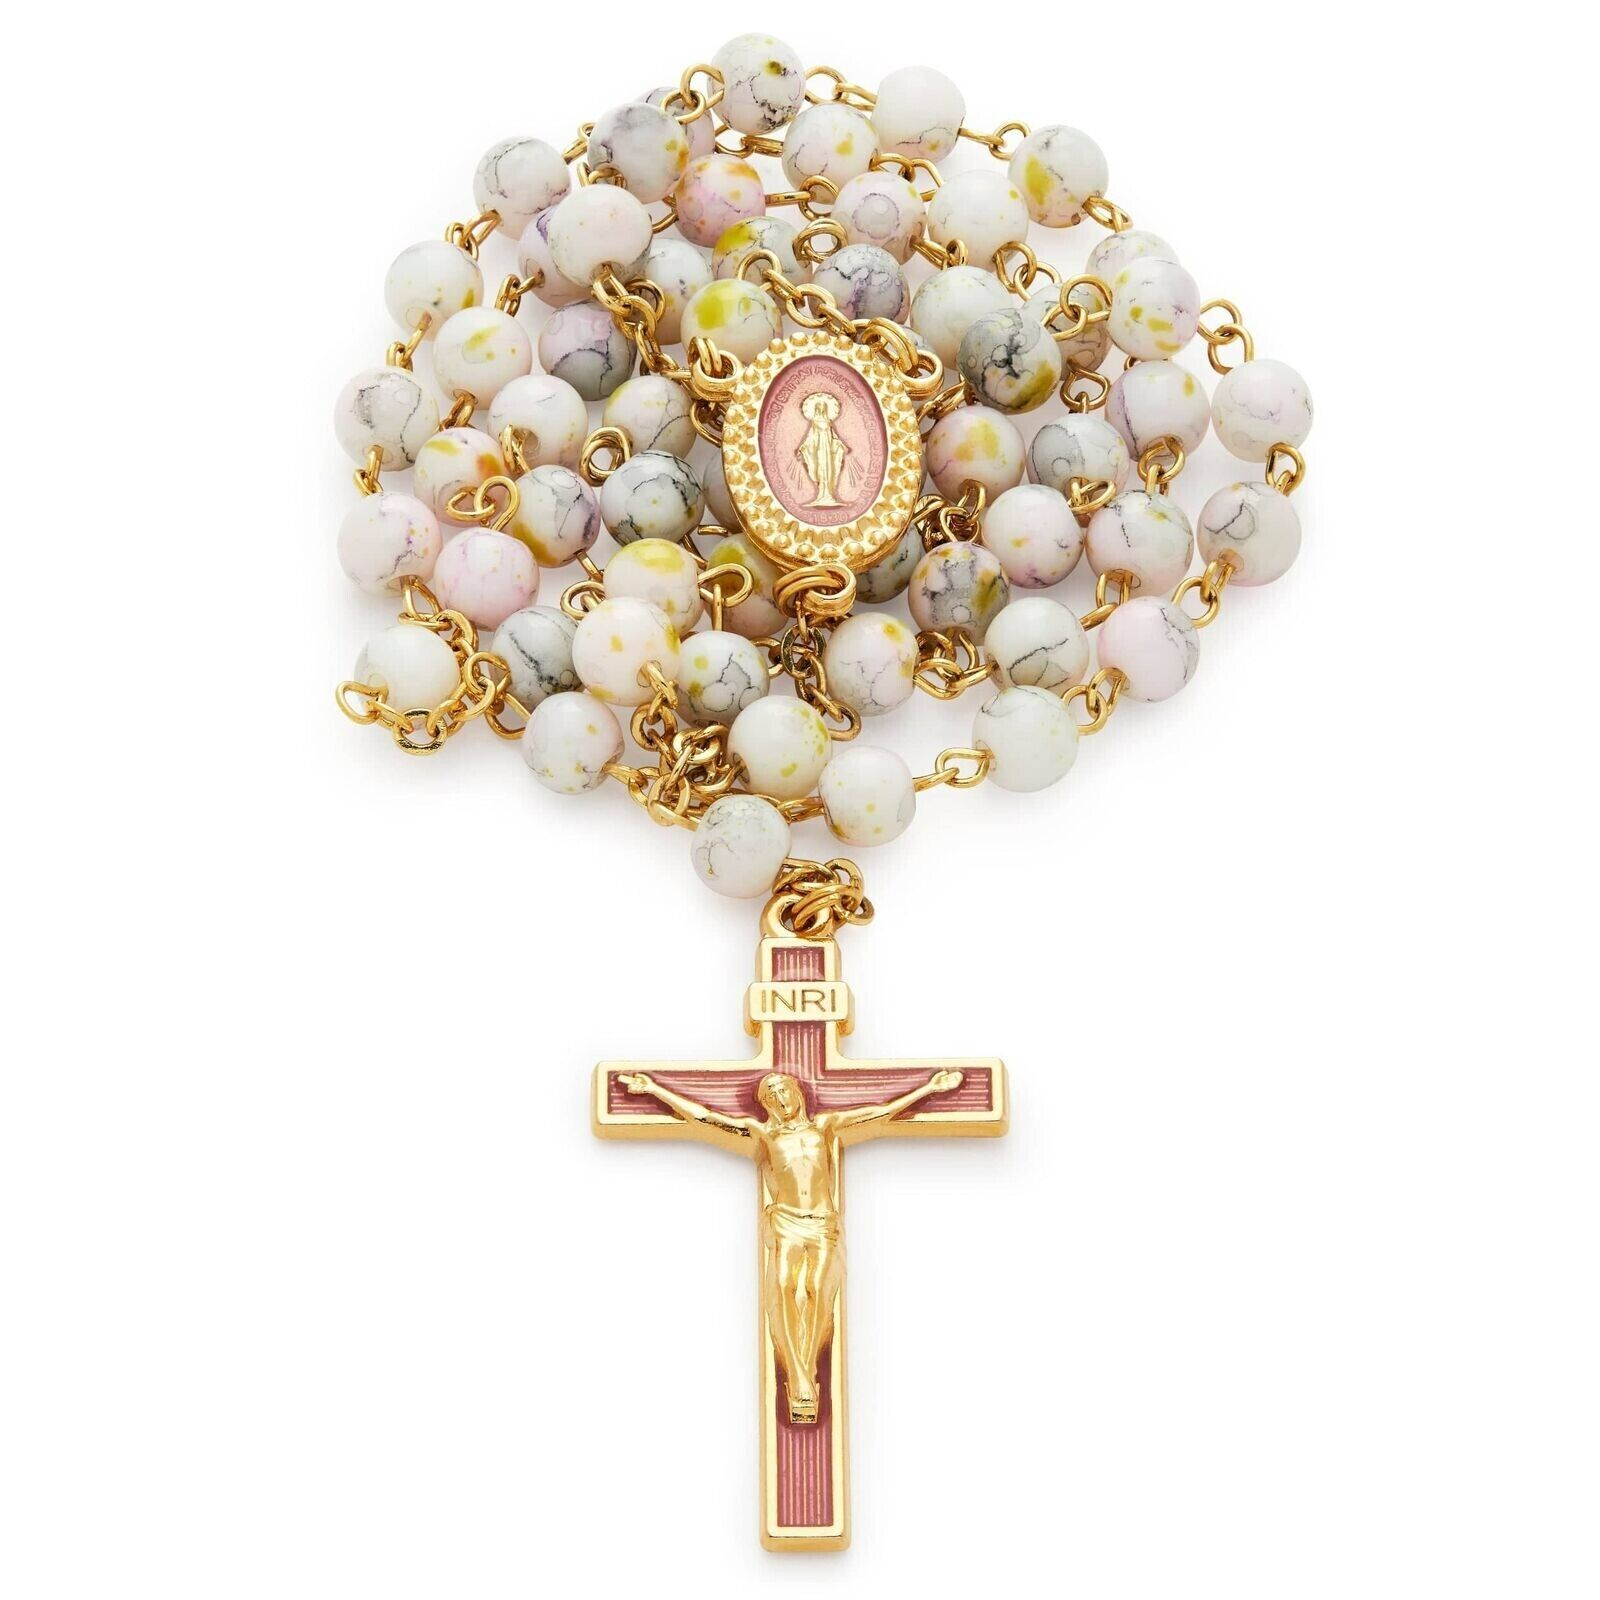 White Rosary Glass Beads Catholic Prayer Necklace Blessed By Pope Made in Italy